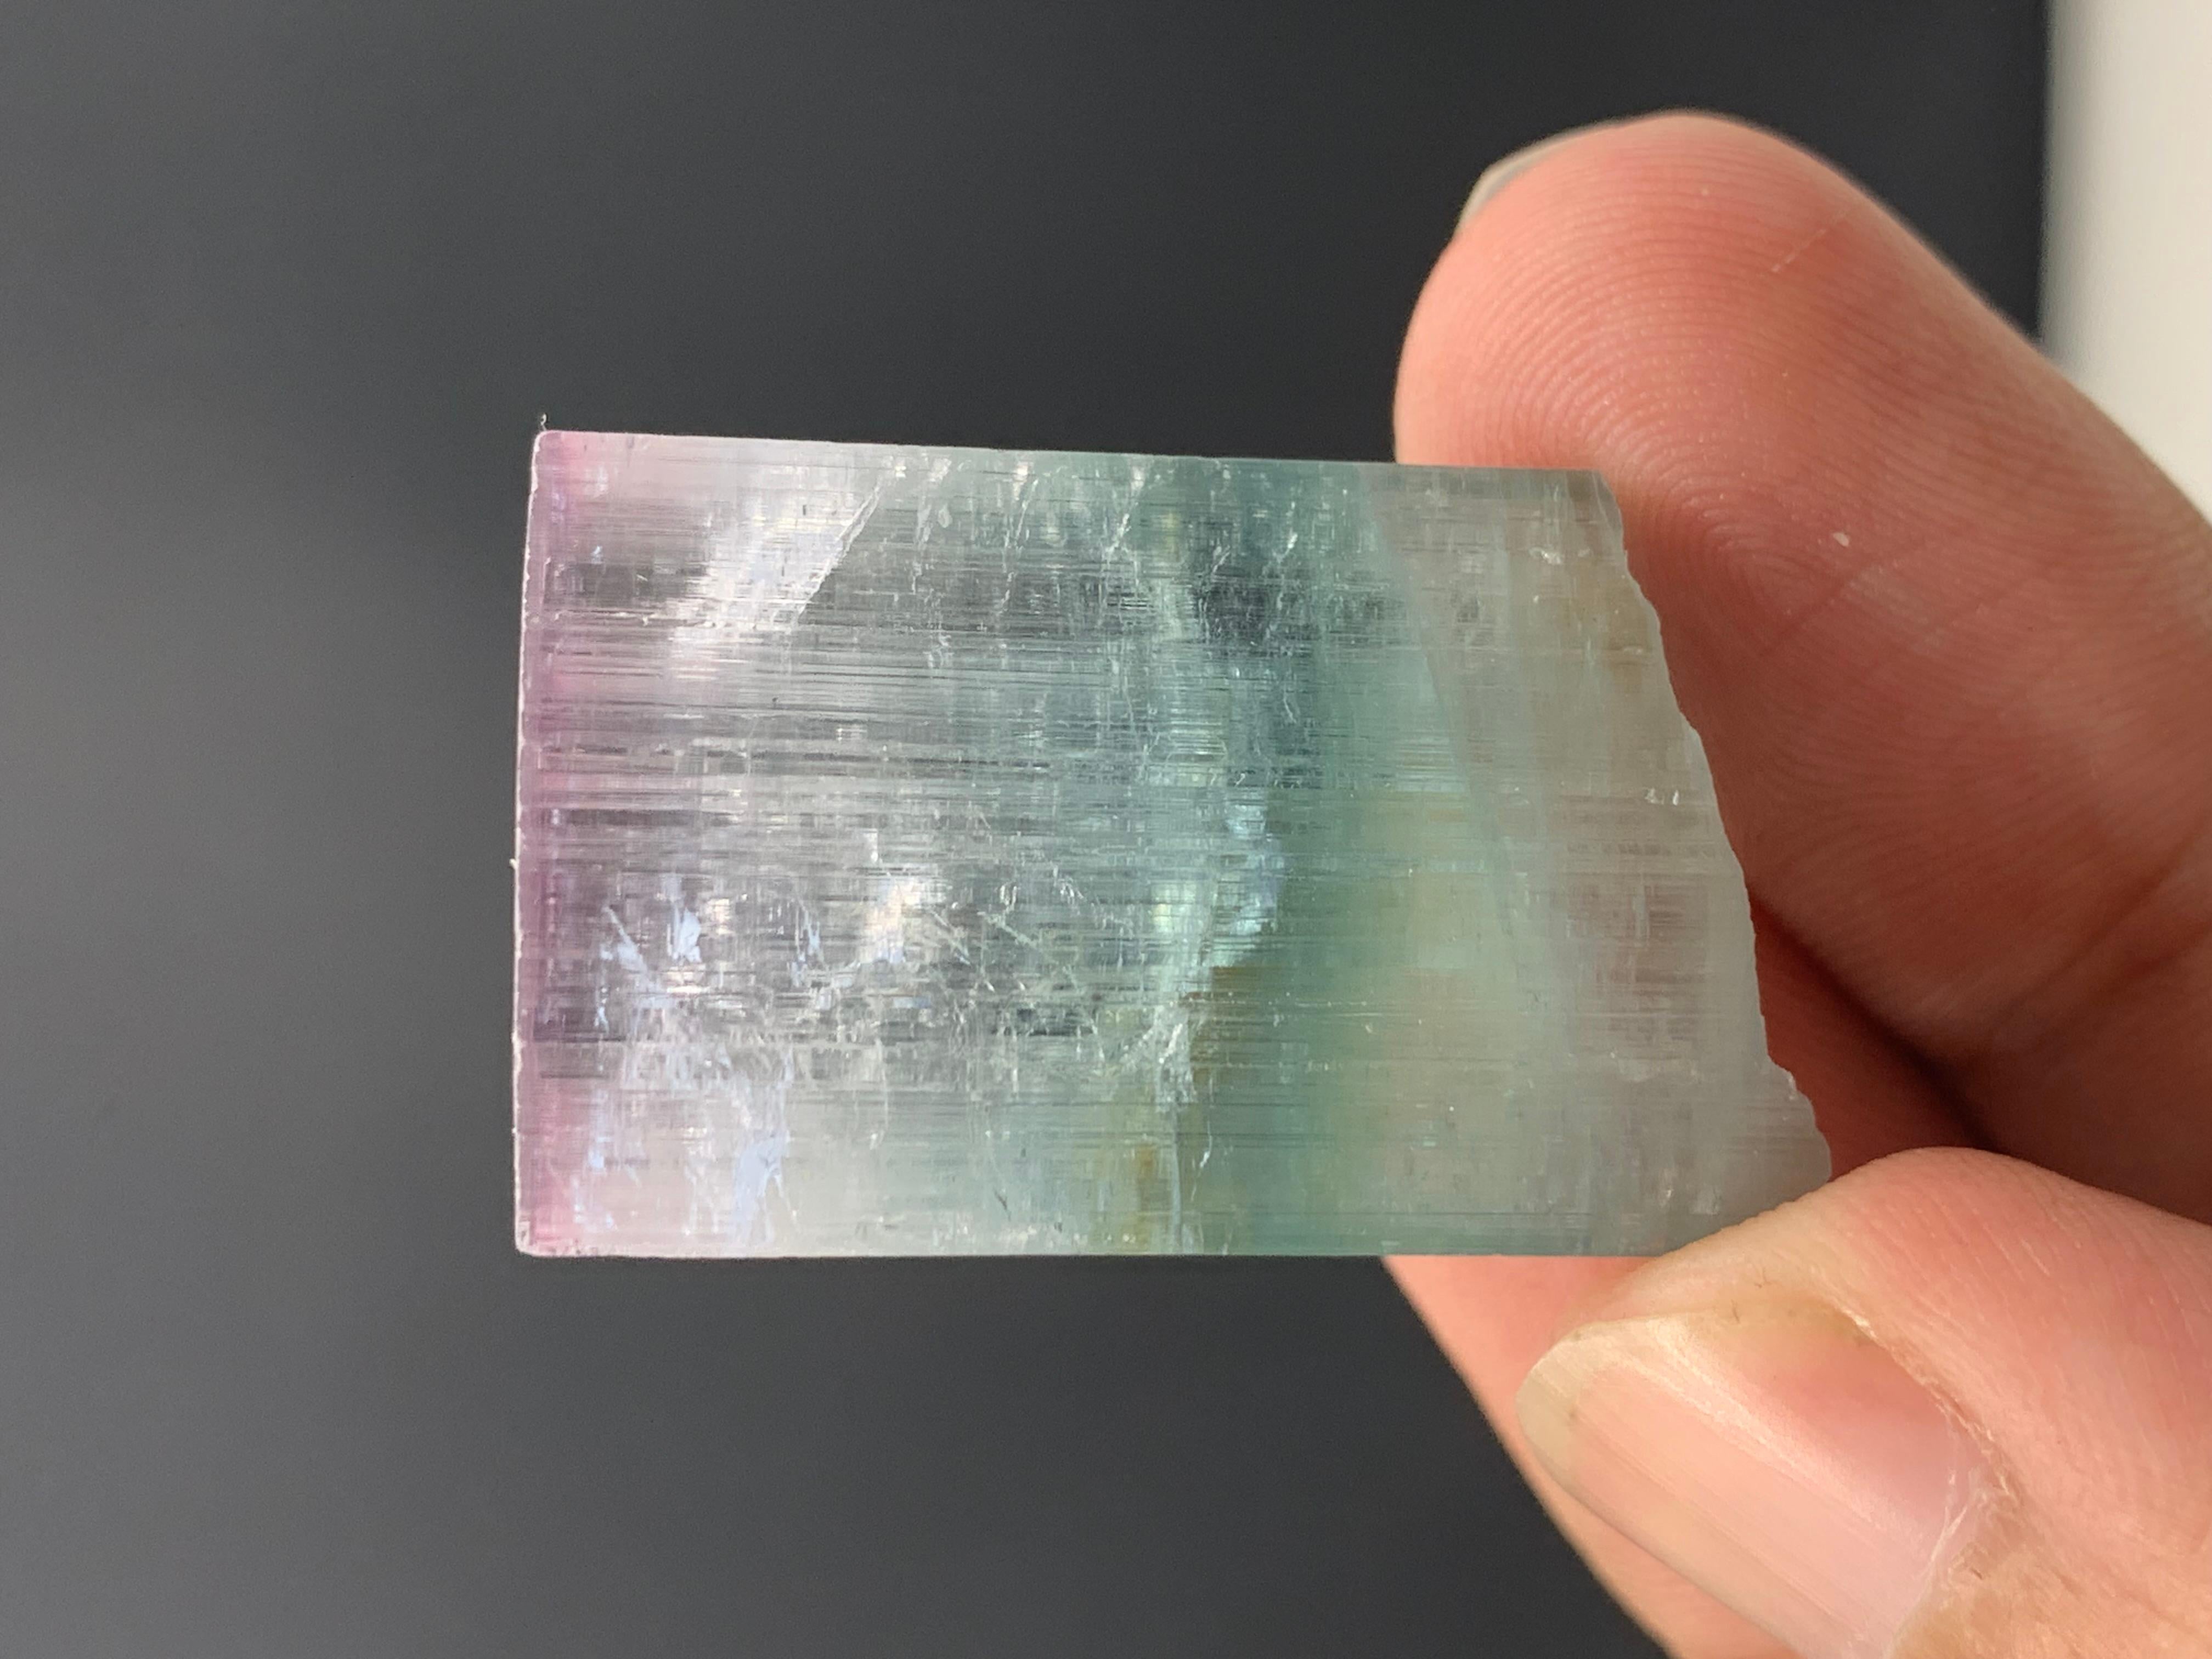 21.07 Gram Eye Catching Tri Color Tourmaline Crystal From Kunar, Afghanistan 

Weight: 21.07 Gram 
Dimension : 3 x 2 x 1.4 Cm
Origin: Kunar, Afghanistan 
Color: Pink, White and Seafoam 

Tourmaline is a crystalline silicate mineral group in which